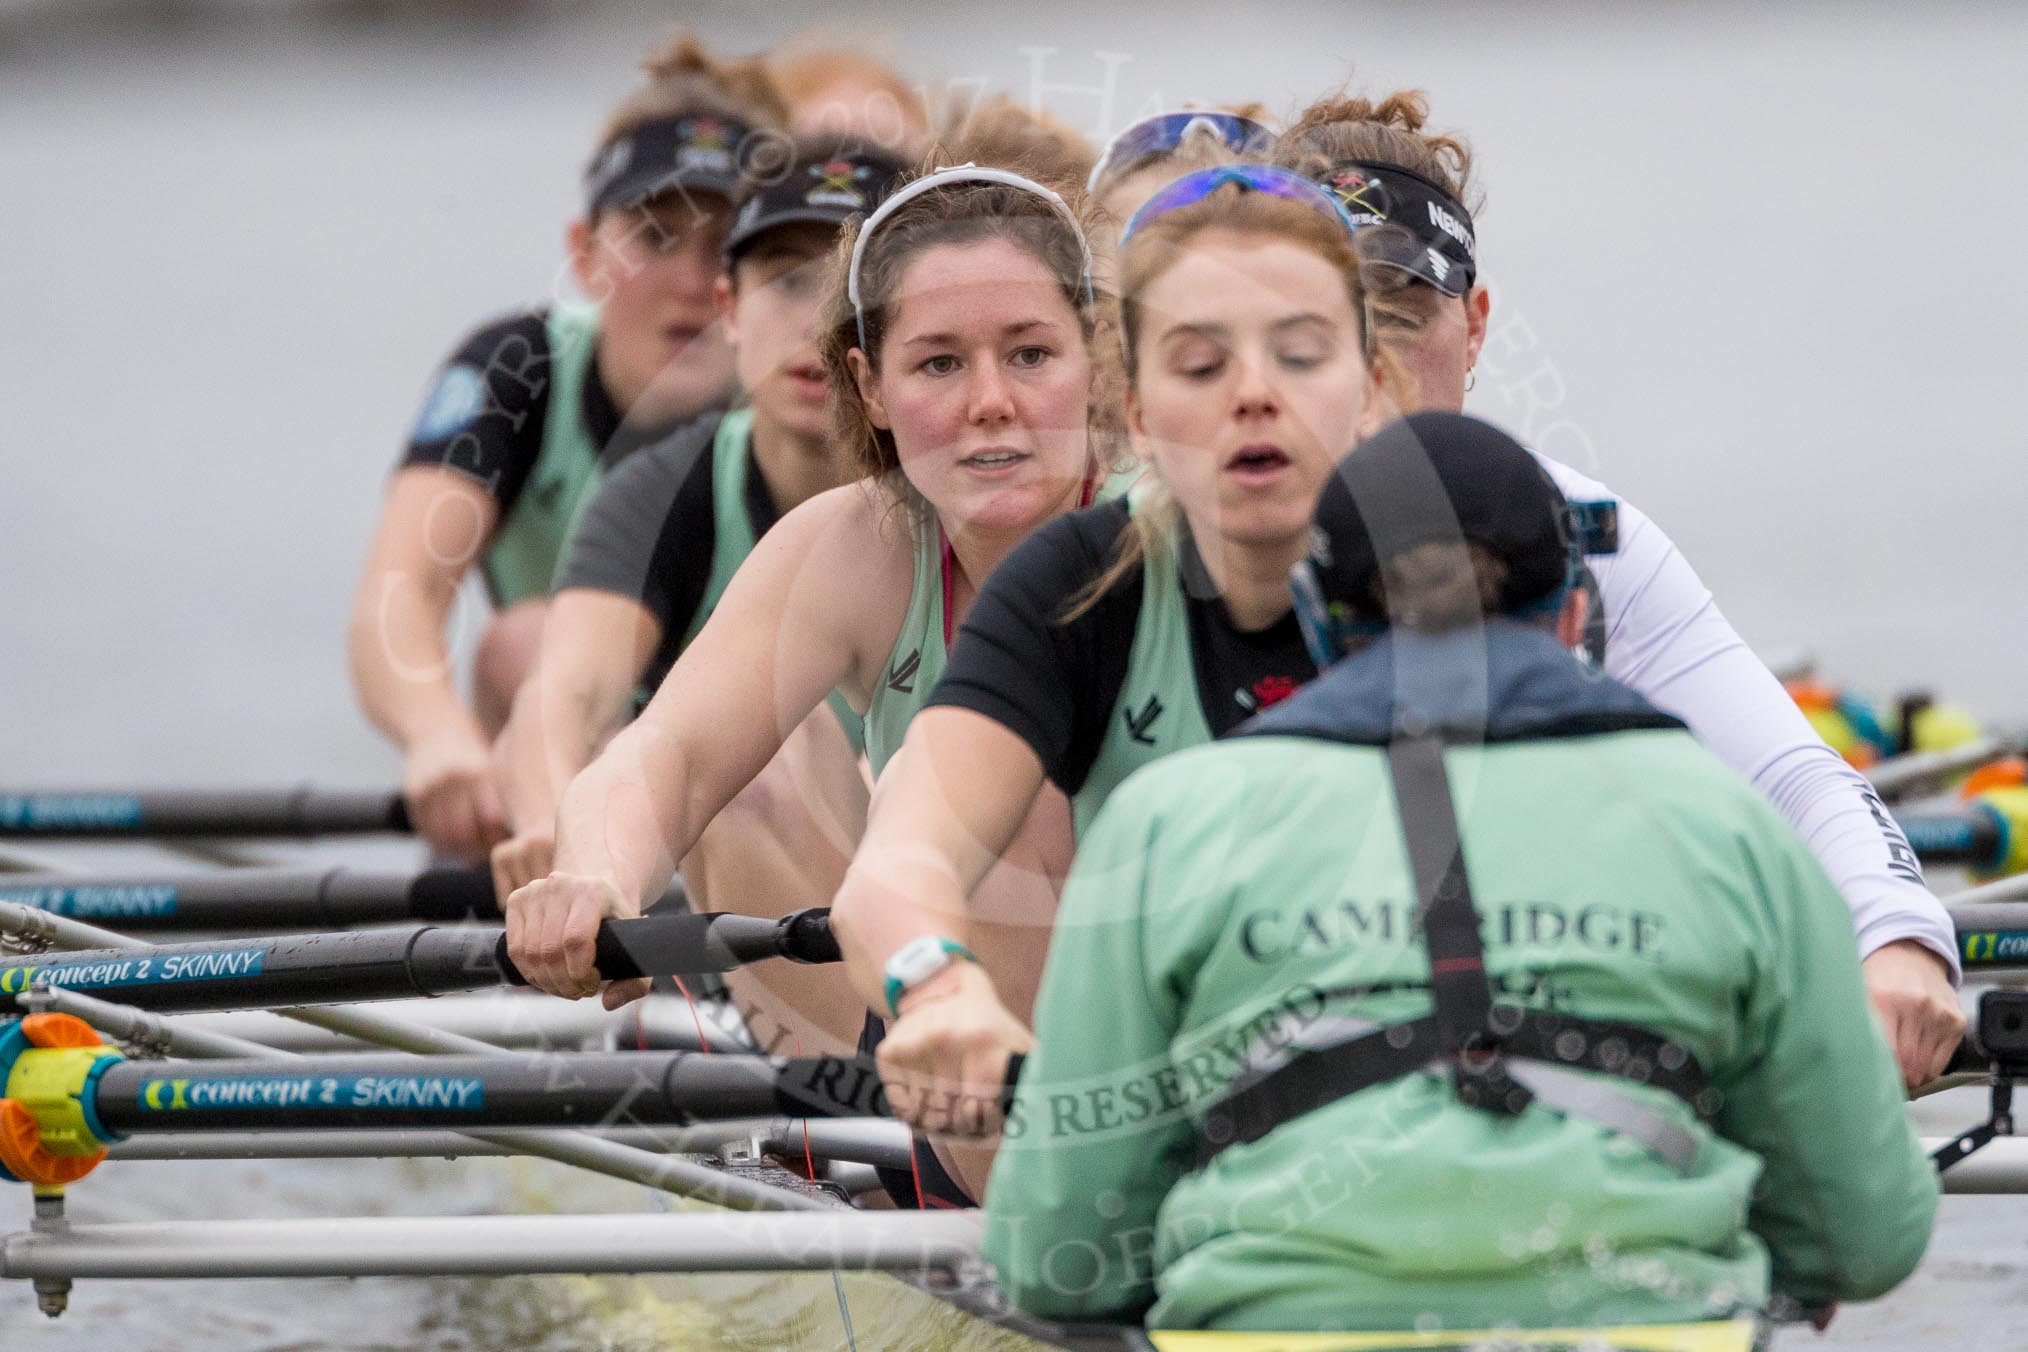 The Boat Race season 2017 - Women's Boat Race Fixture CUWBC vs Univerity of London: The CUWBC eight at the start of the race, cox - Matthew Holland, stroke - Alice White, 7 - Myriam Goudet, 6 - Melissa Wilson, 5 - Holy Hill, 4 - Imogen Grant, 3 - Ashton Brown, 2 - Kirsten Van Fosen, bow - Claire Lambe.
River Thames between Putney Bridge and Mortlake,
London SW15,

United Kingdom,
on 19 February 2017 at 16:01, image #68